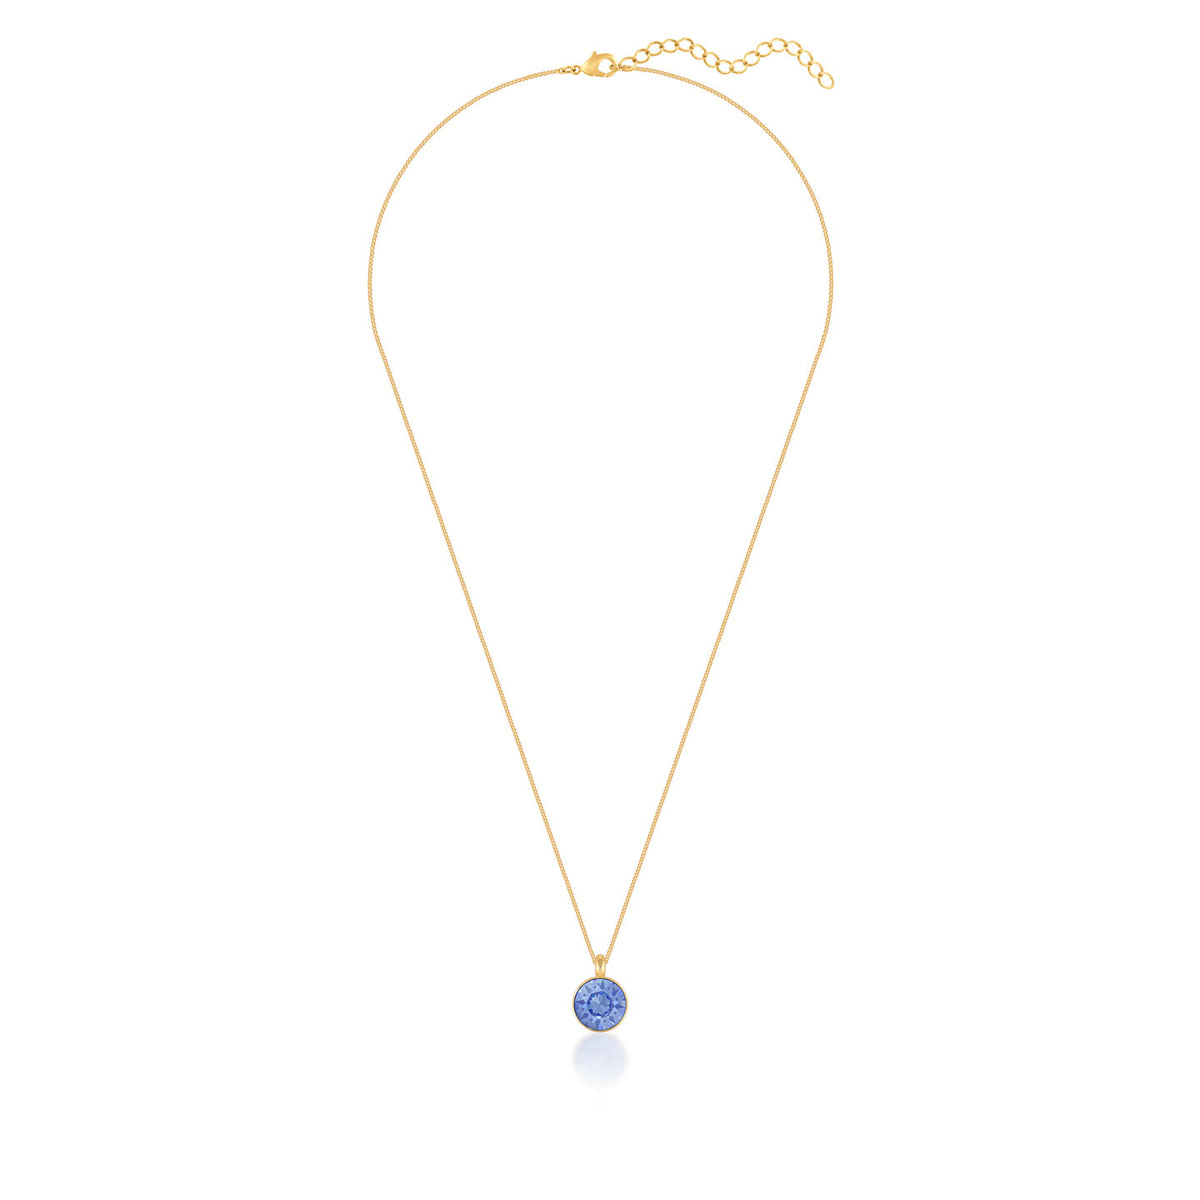 Bella Pendant Necklace with Blue Light Sapphire Round Crystals from Swarovski Gold Plated - Ed Heart